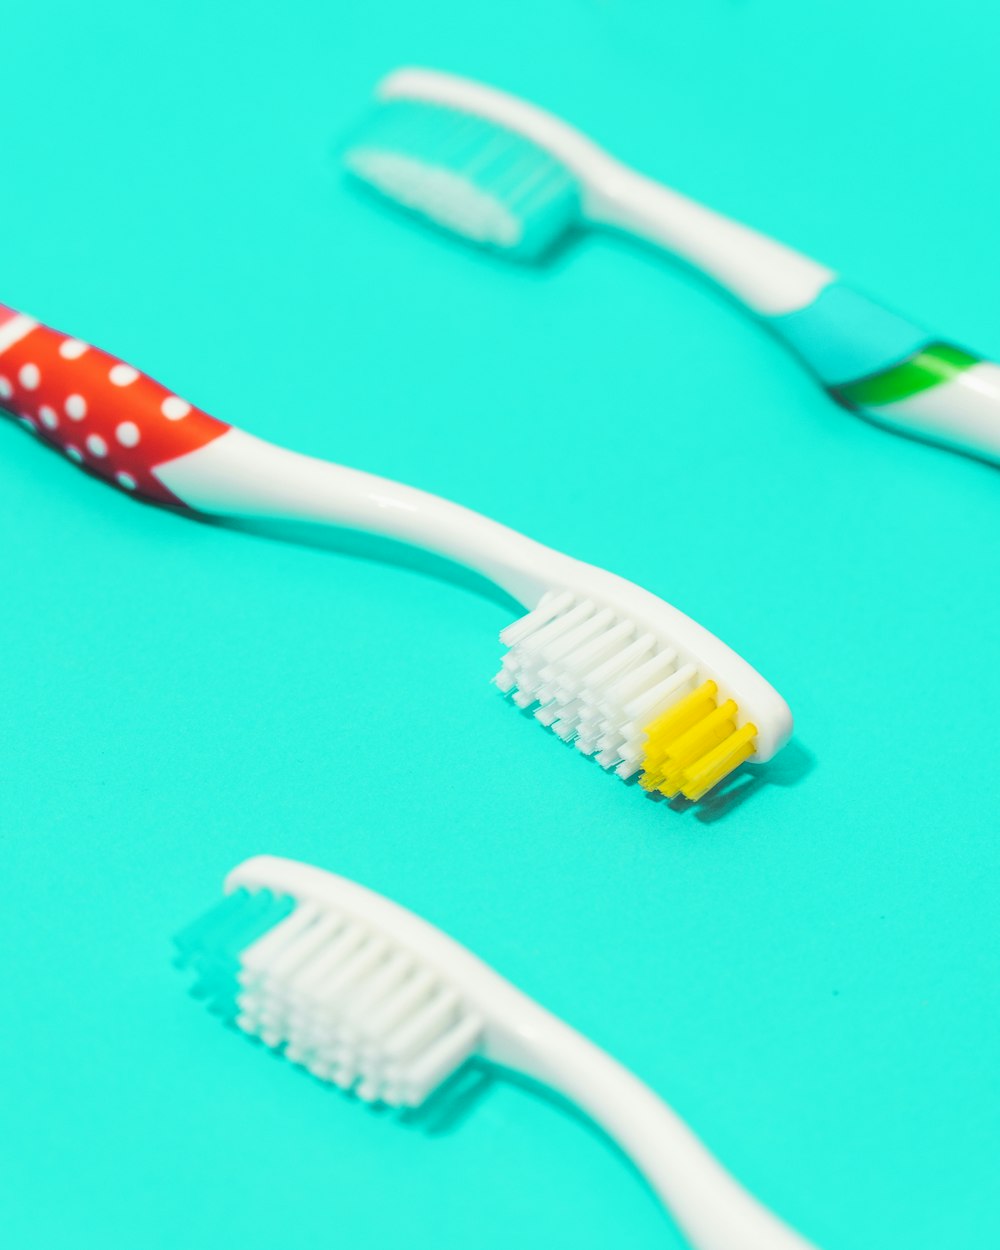 white and green toothbrush on teal surface